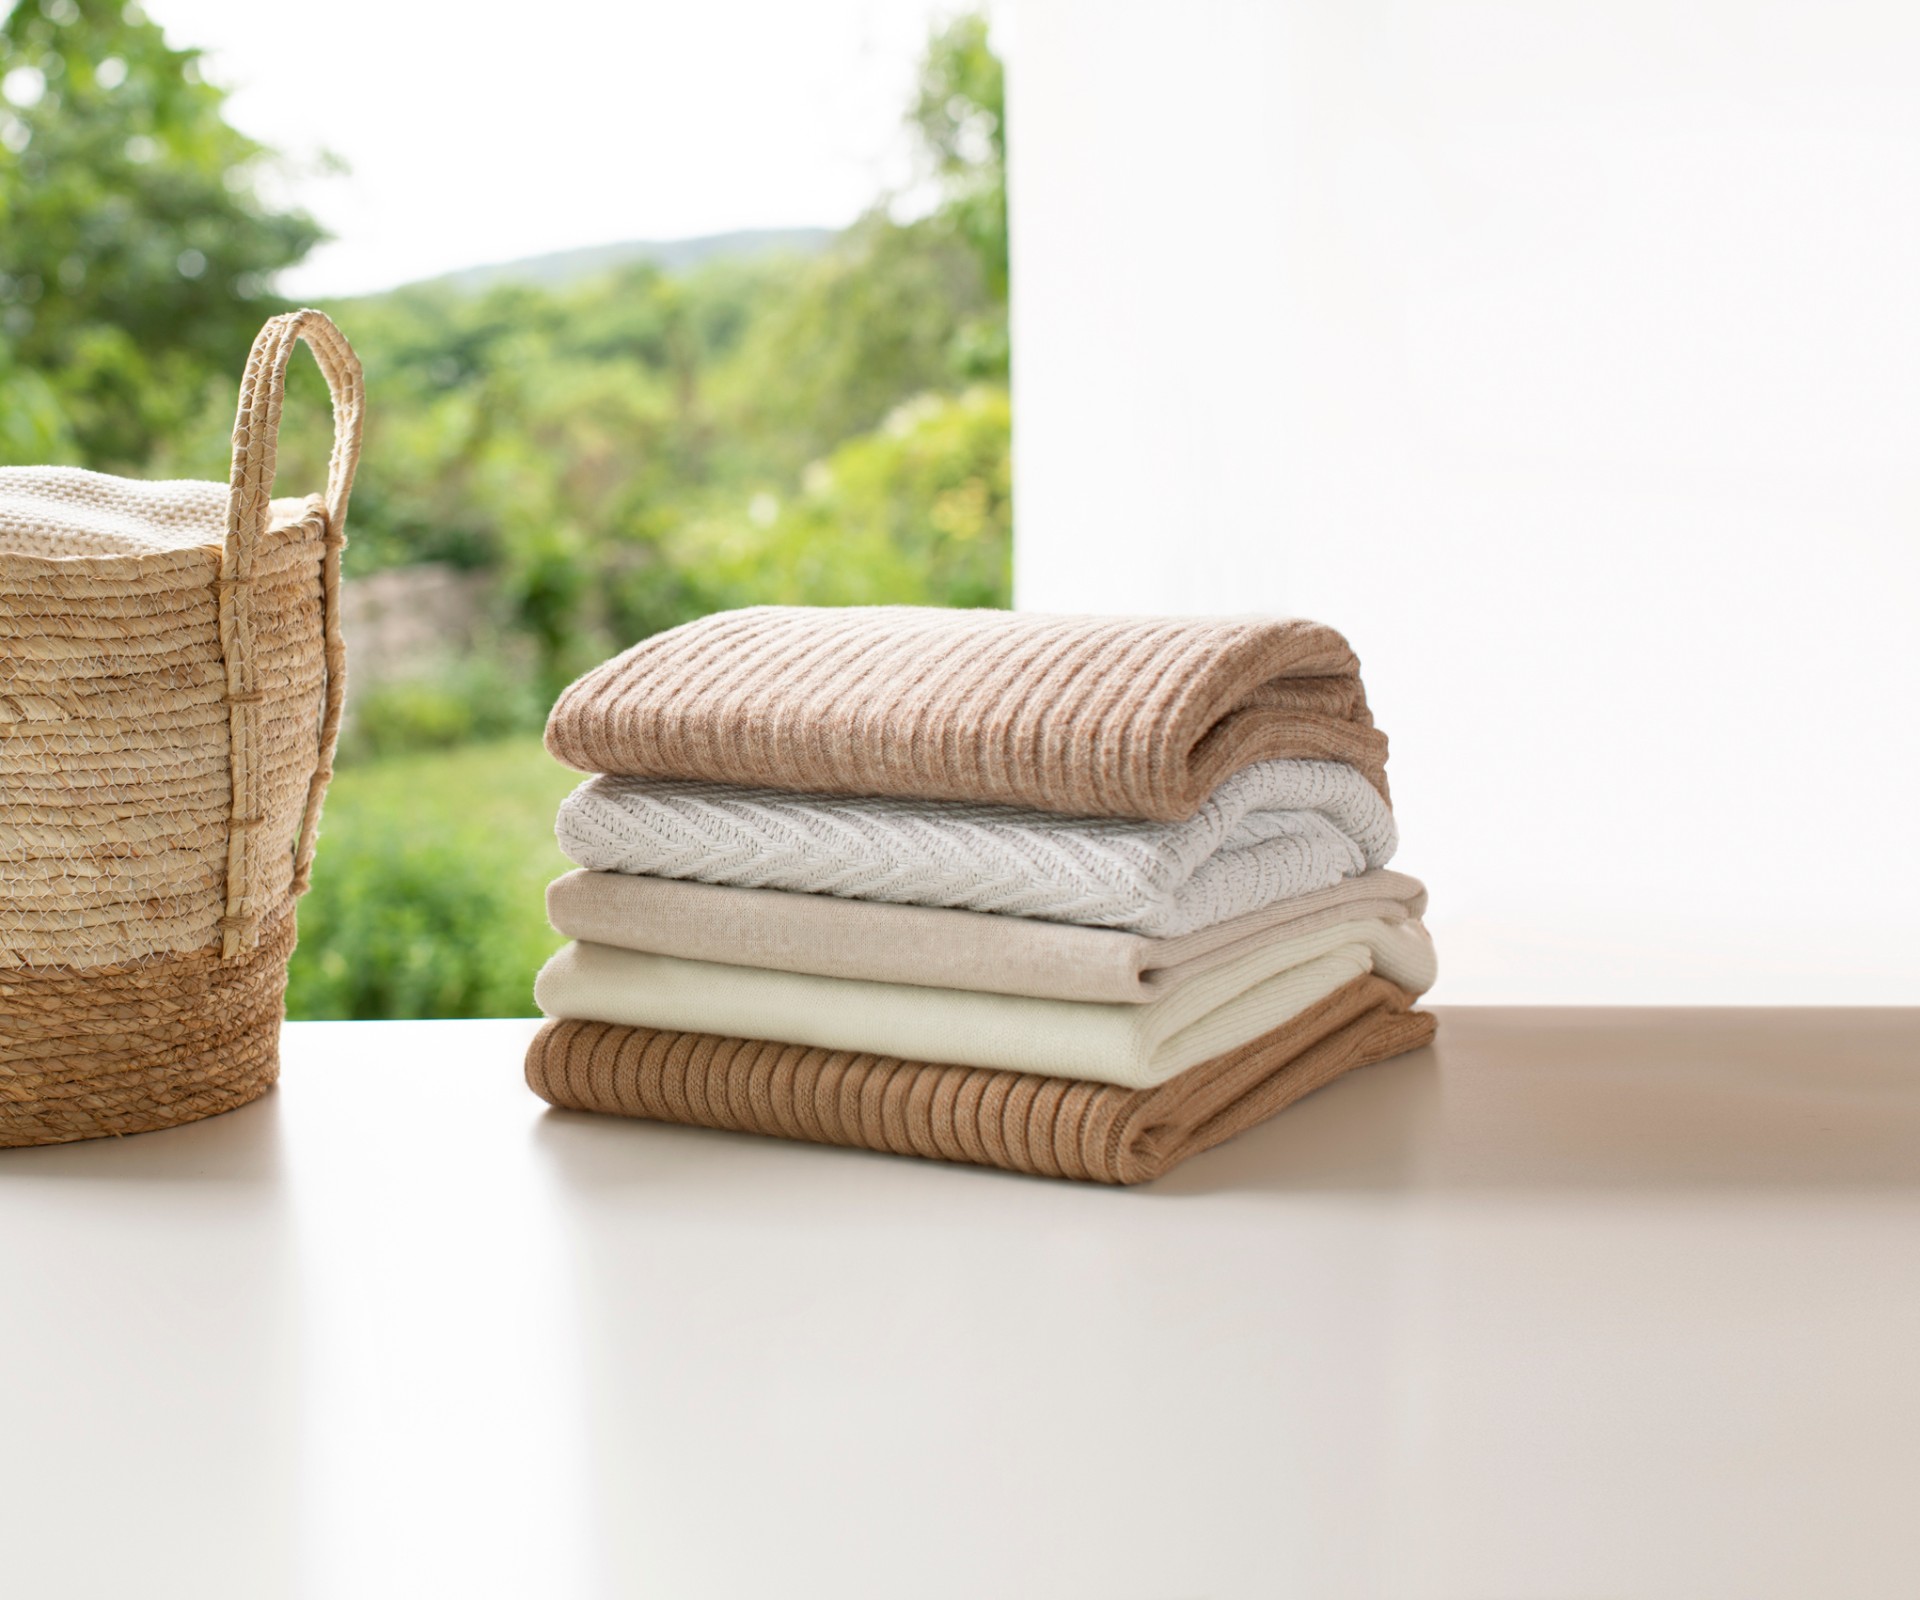 Stacked towels lying next to a basket with laundry